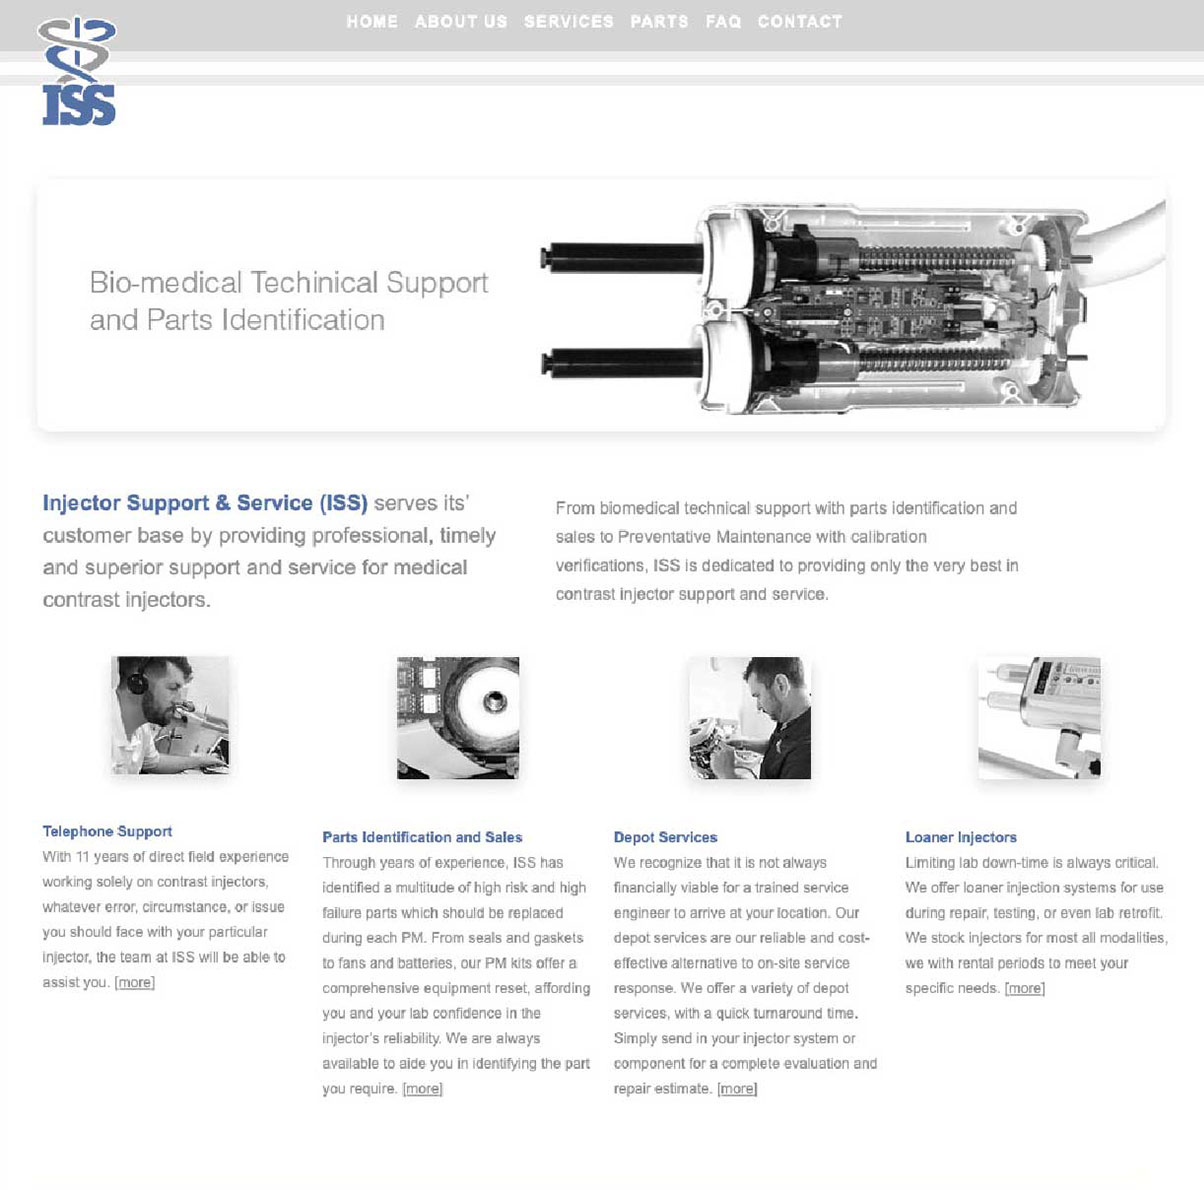 Inector Support and Service Website